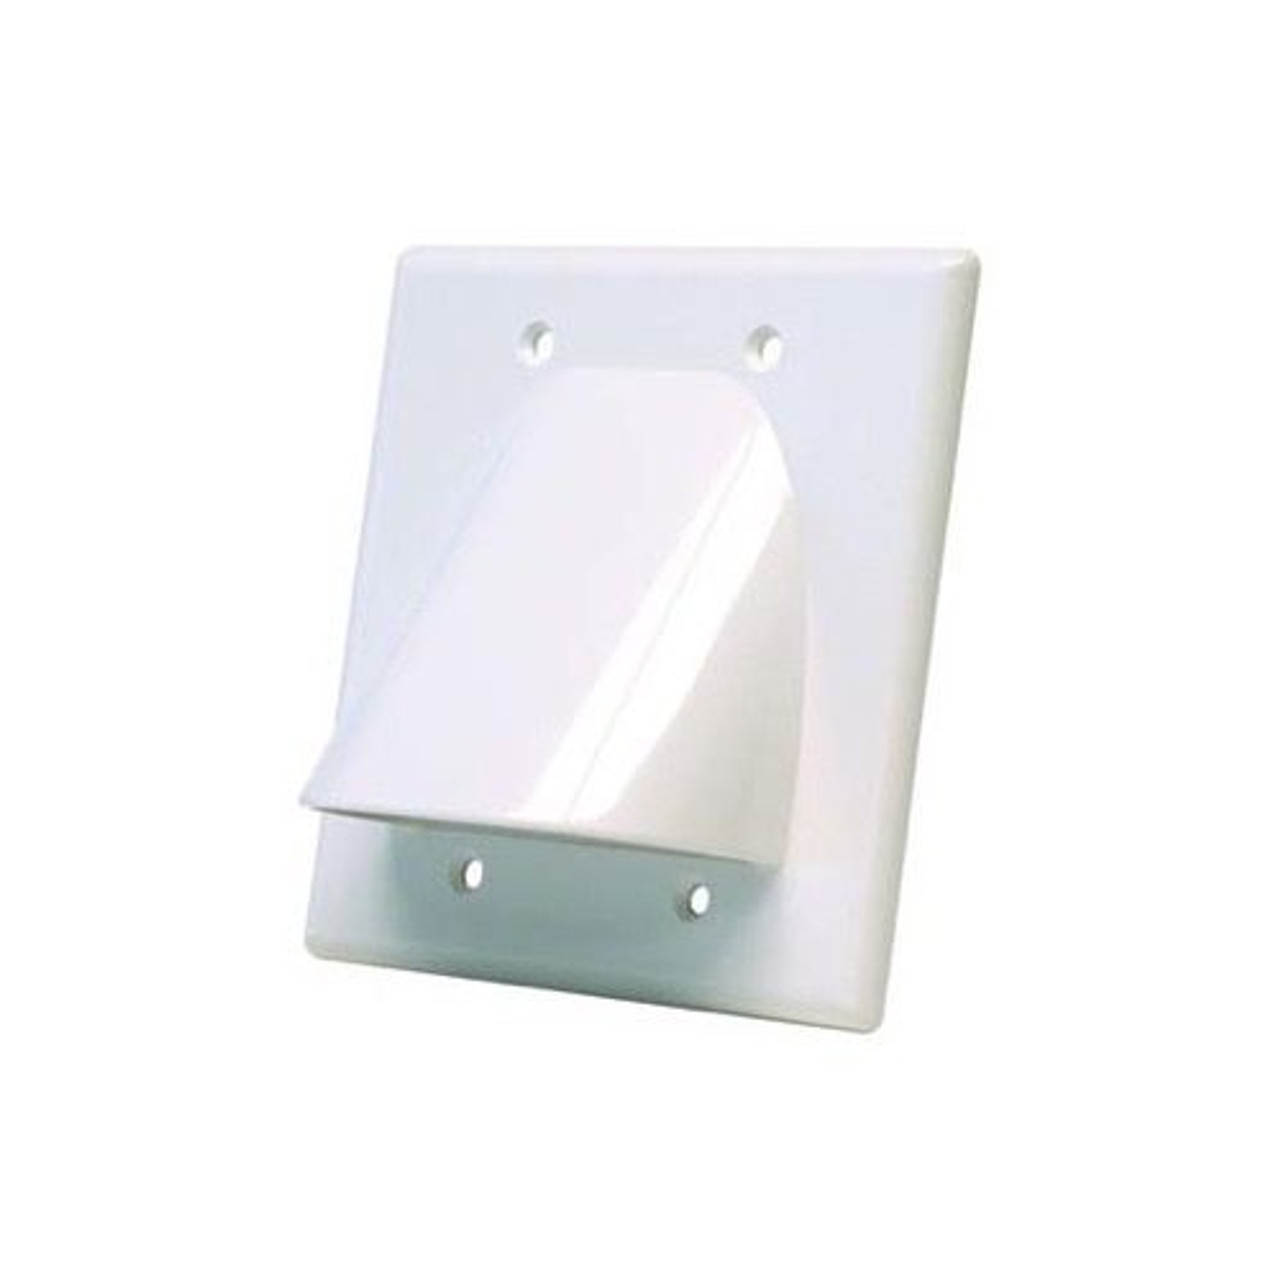 Eagle Dual Gang Bulk Cable Wall Plate White (2) Gang Multiple Flush Mount, Audio Video Data Junction Component Wide Pass-Through Opening Slot